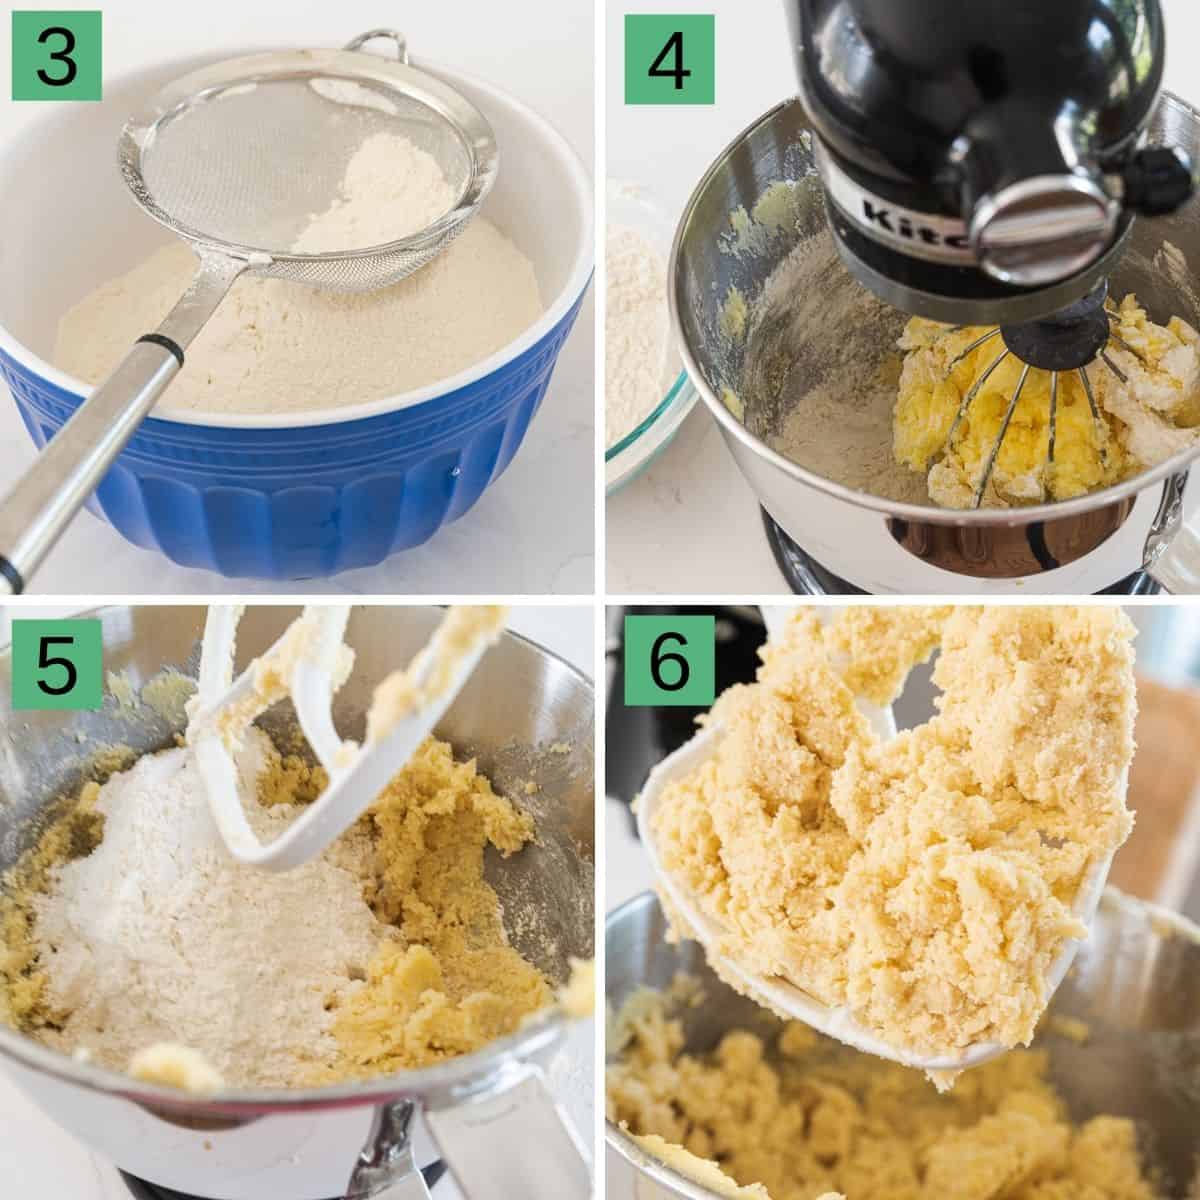 adding the sifted flour to the shortbread cookie dough